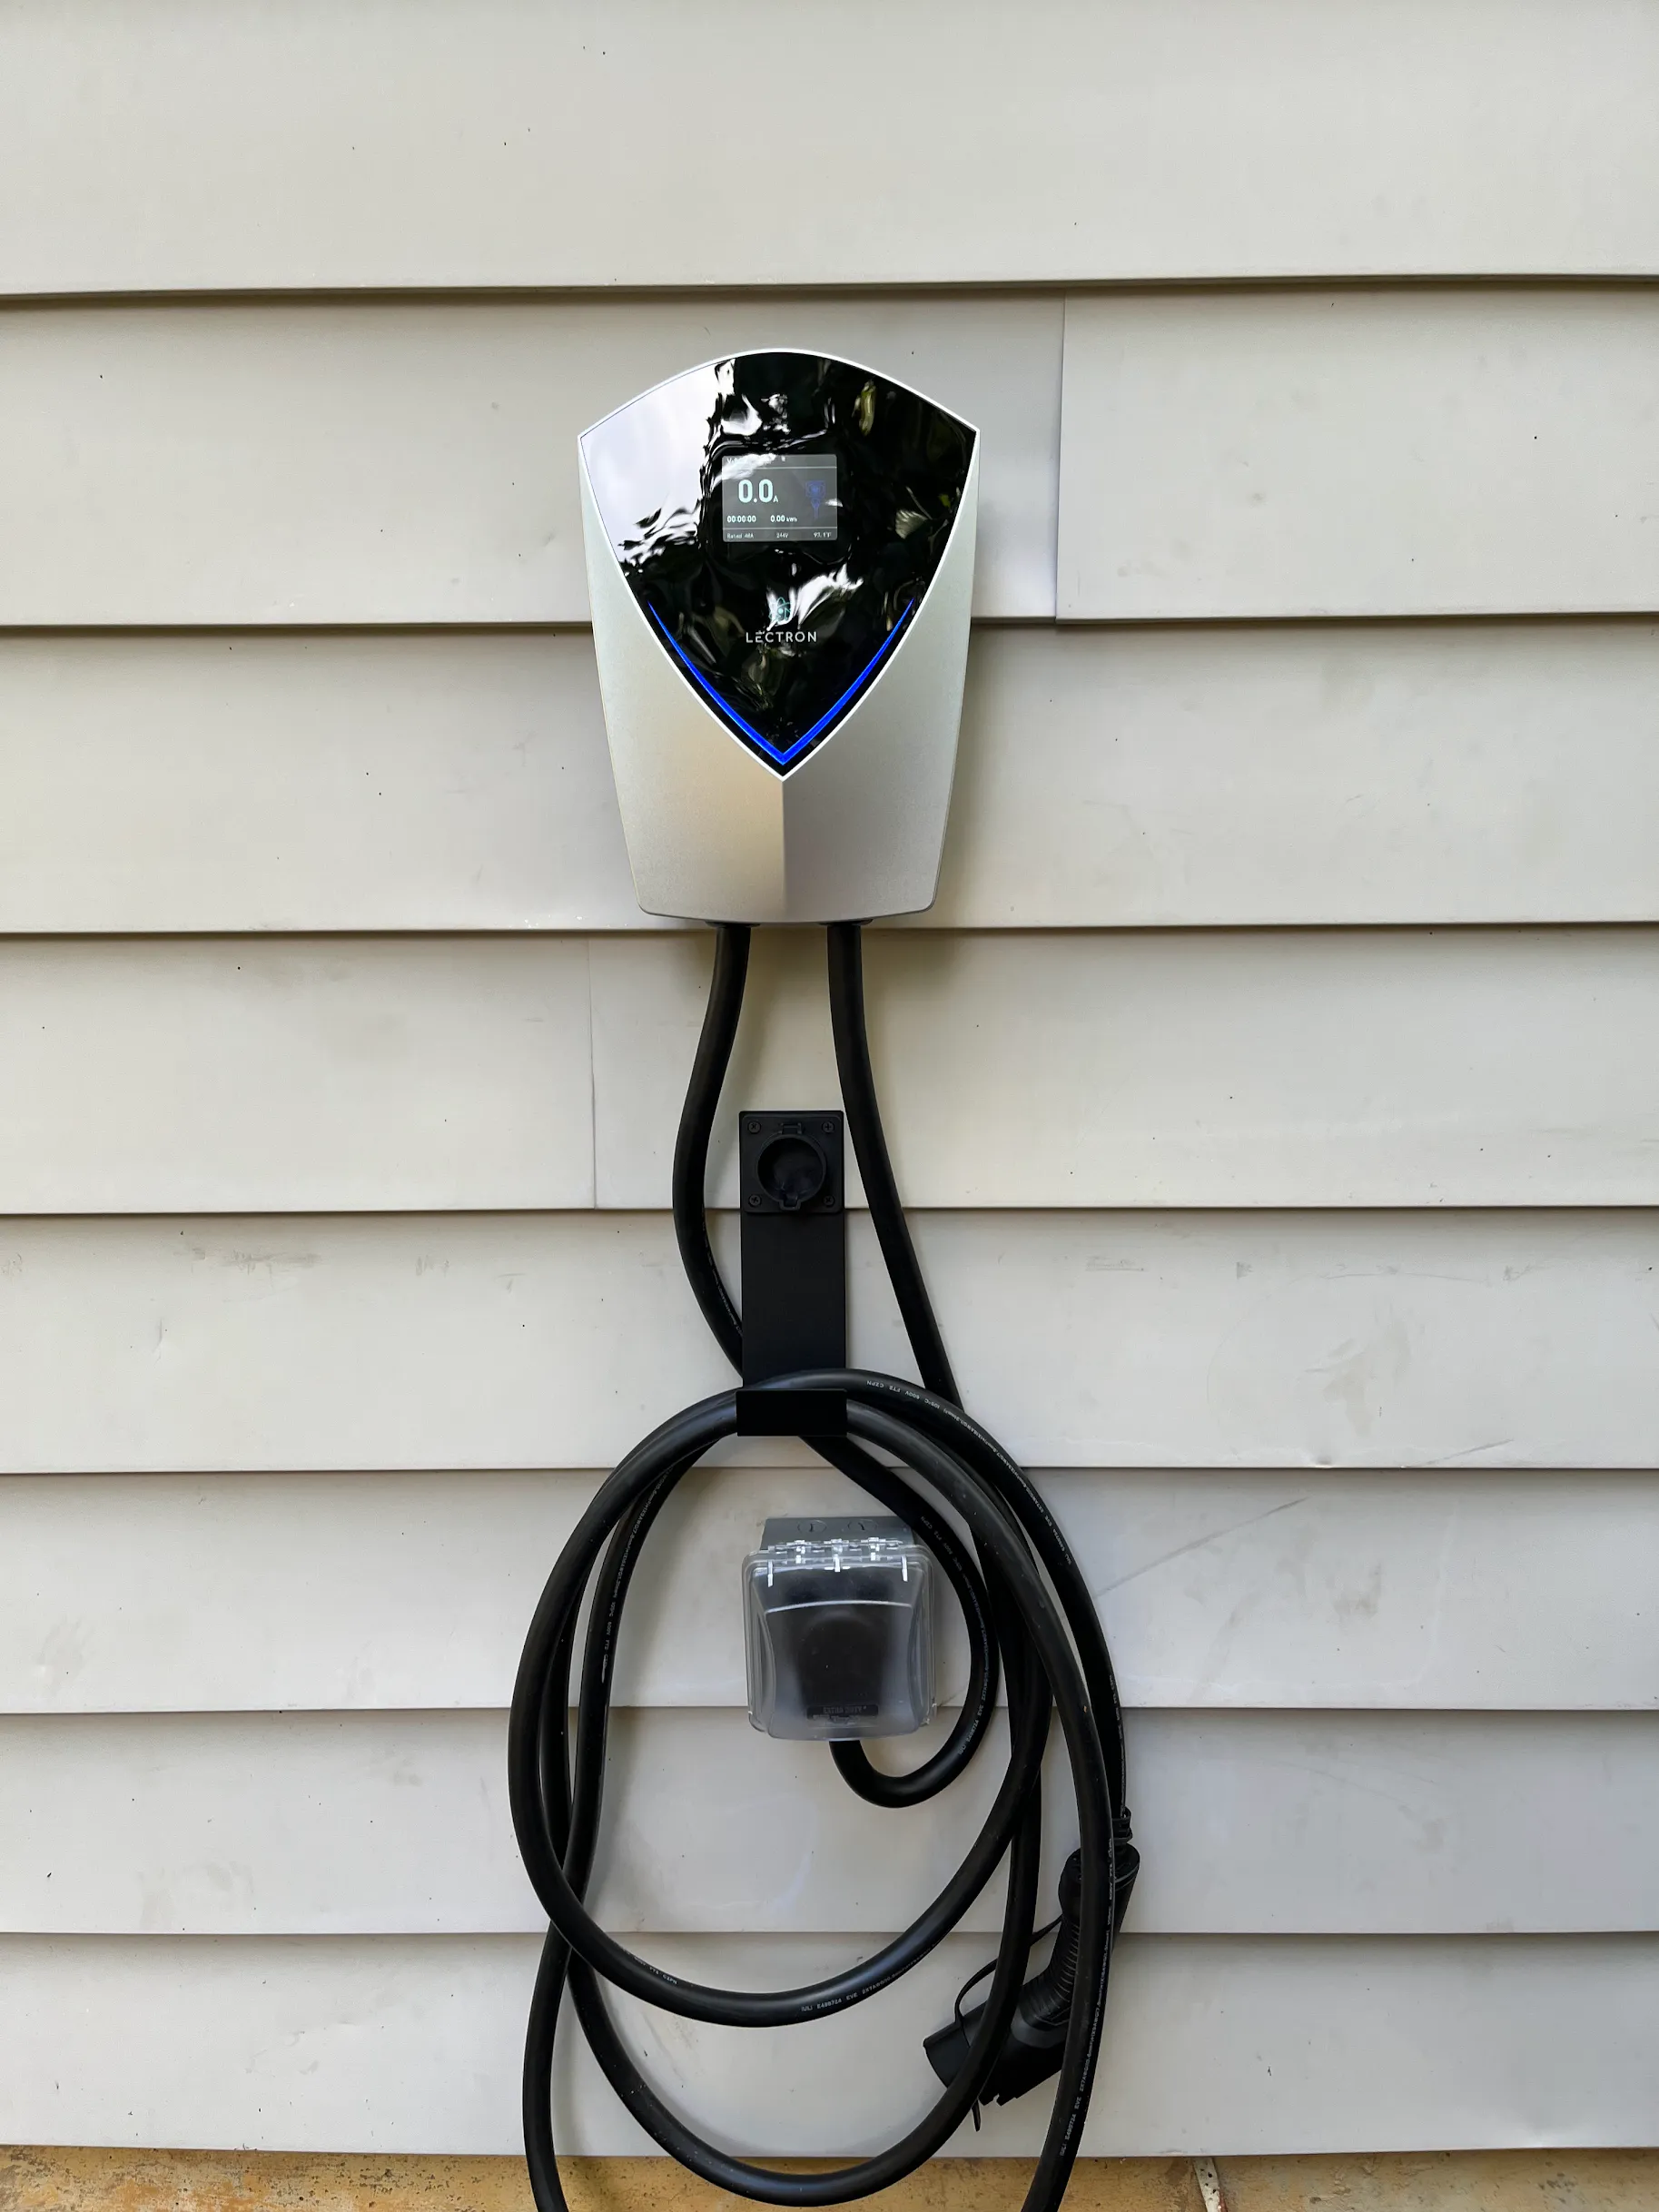 electric vehicle charging installation